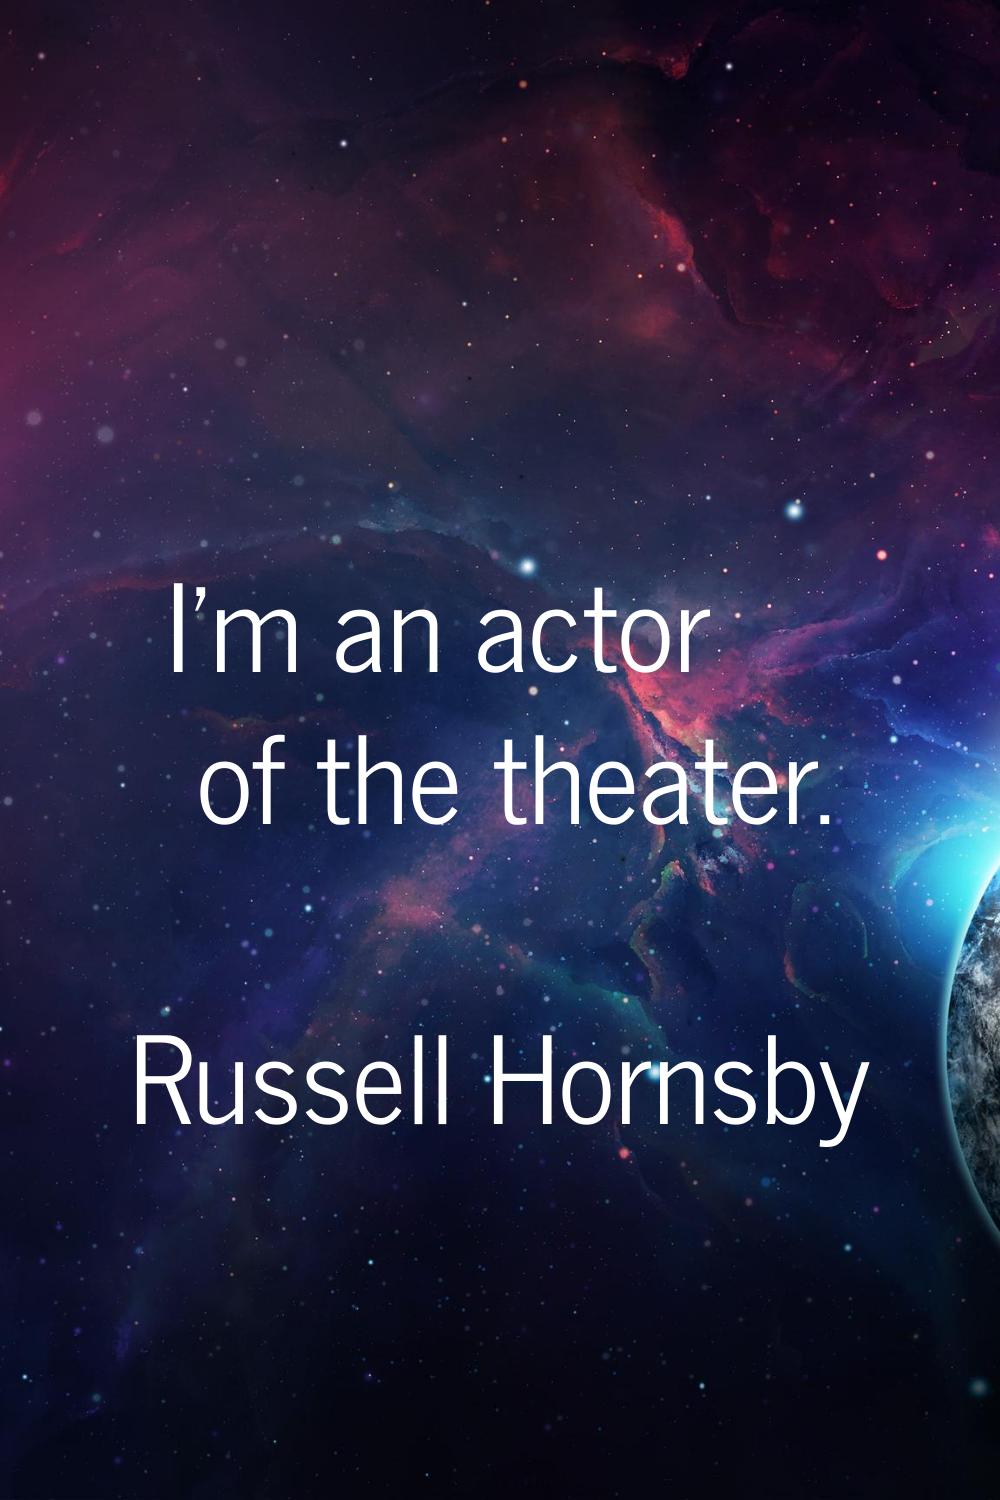 I'm an actor of the theater.